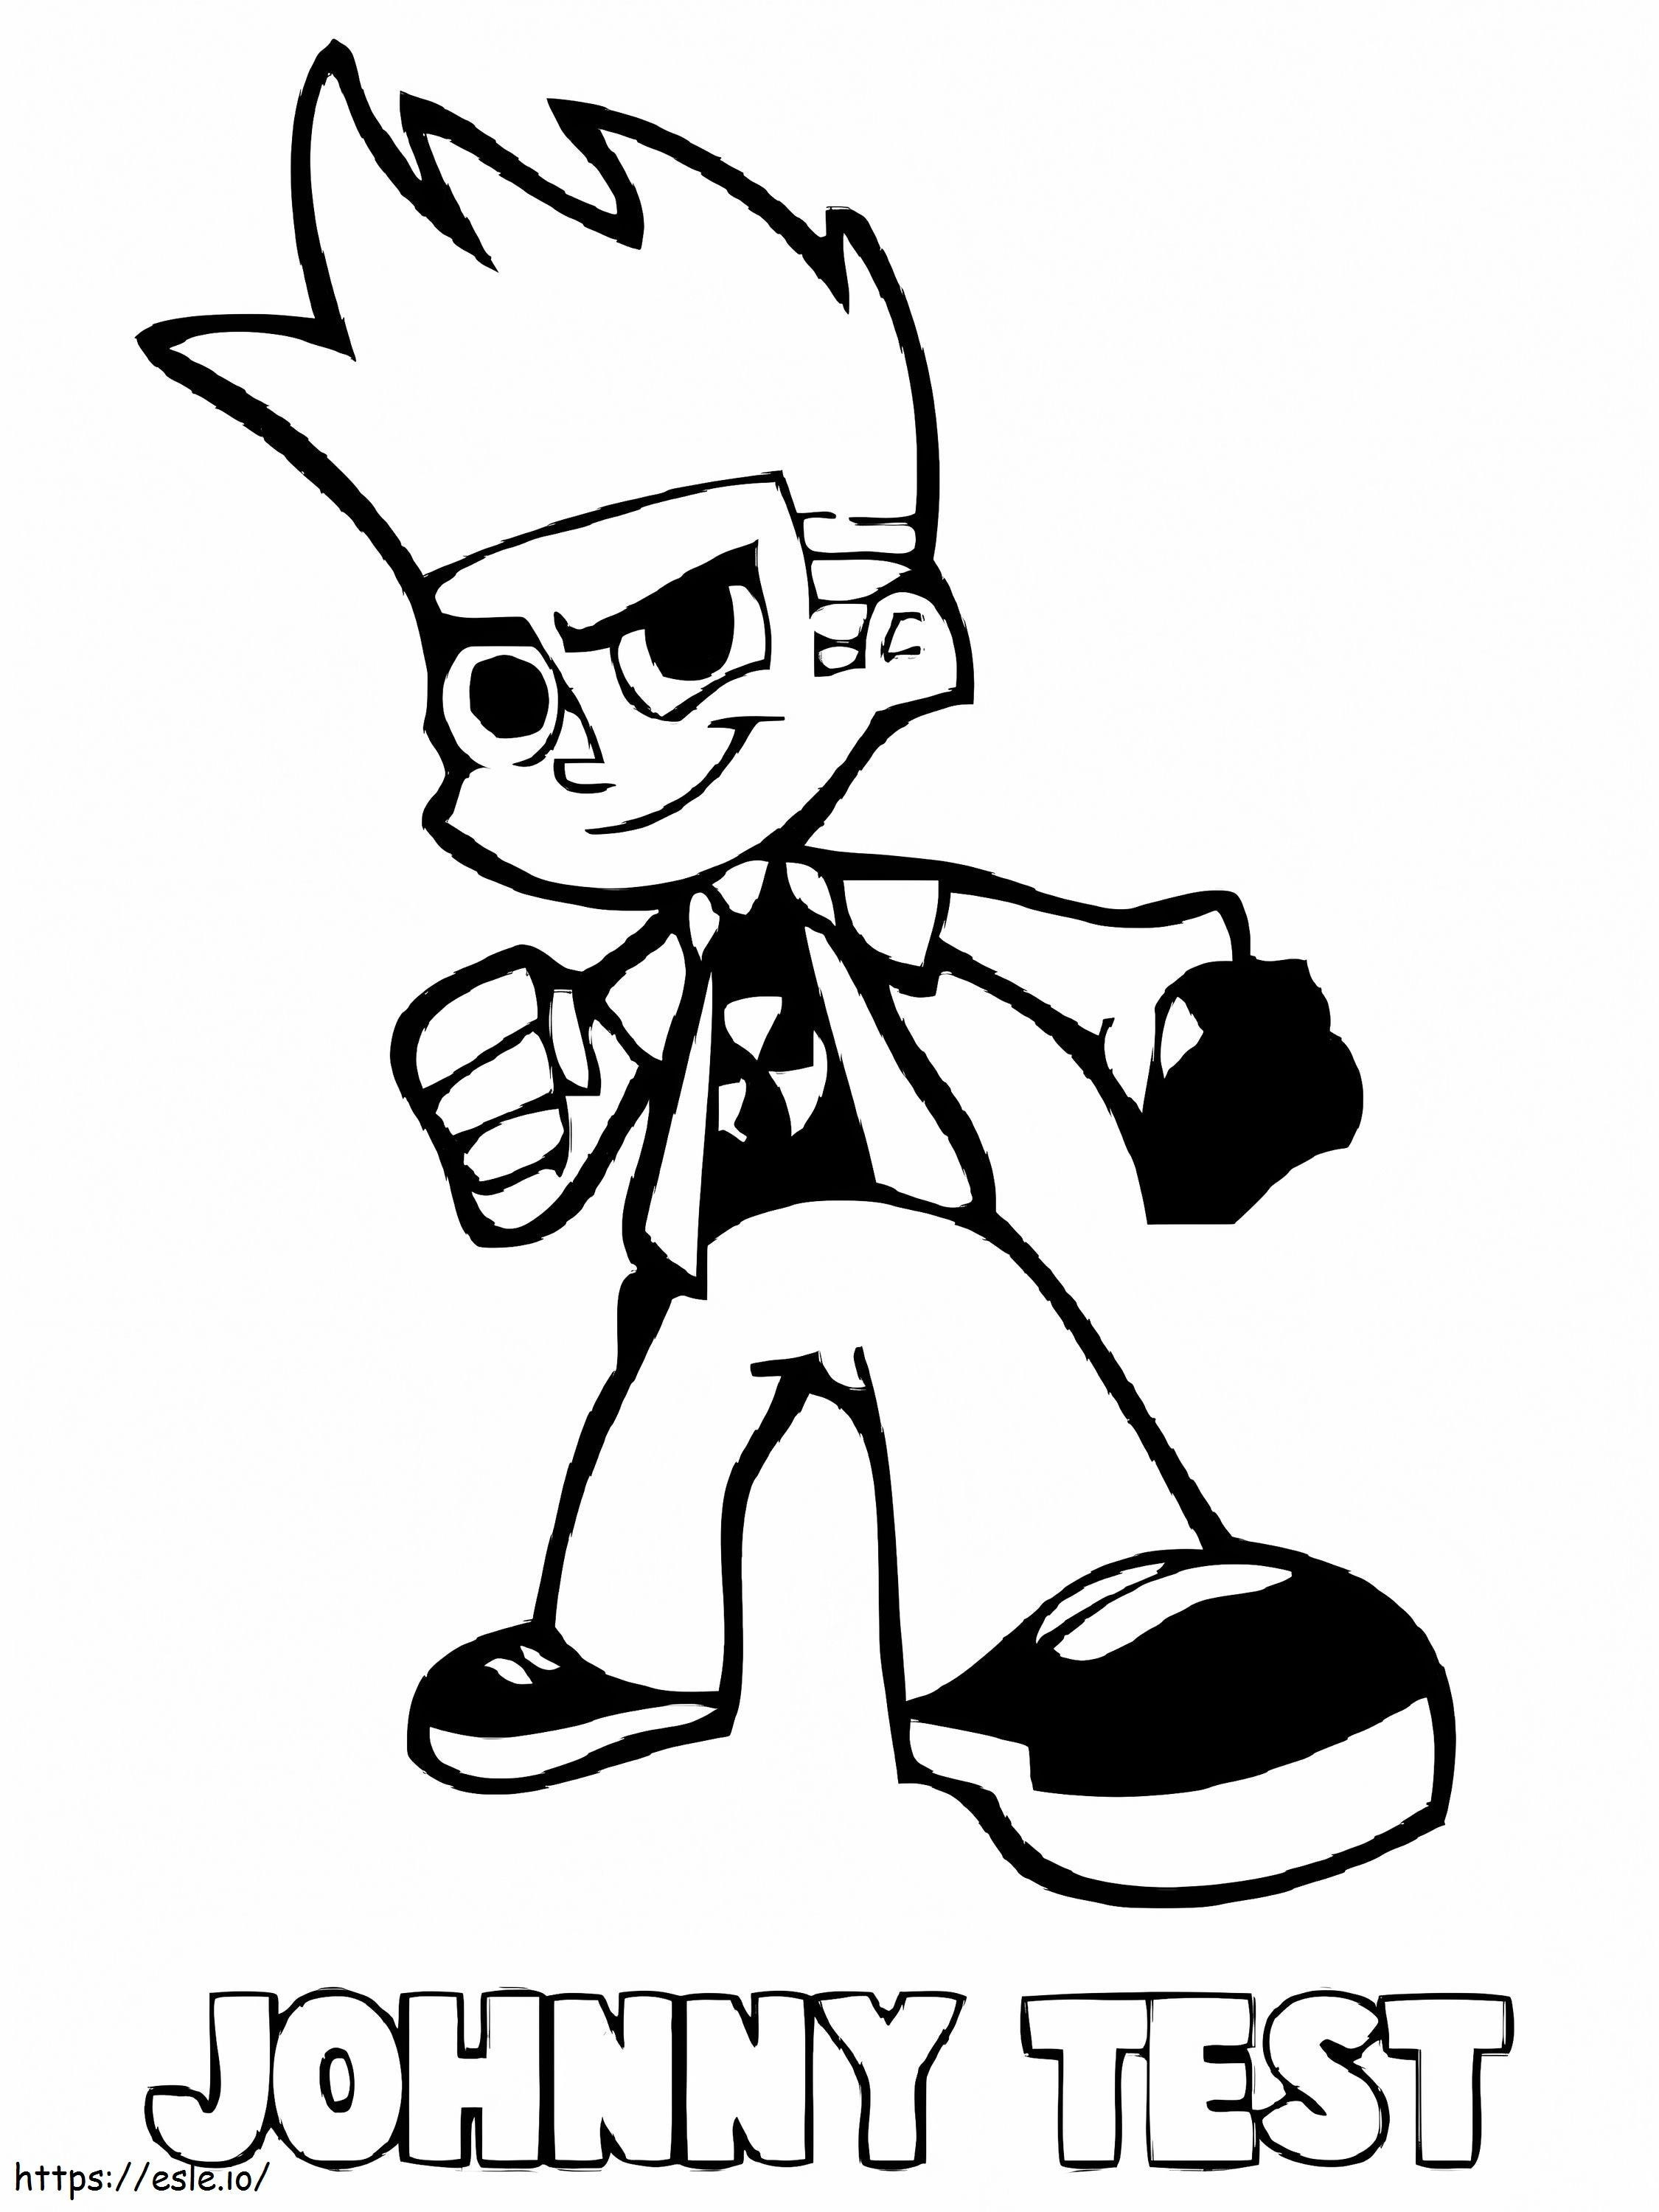 Amazing Johnny Test coloring page